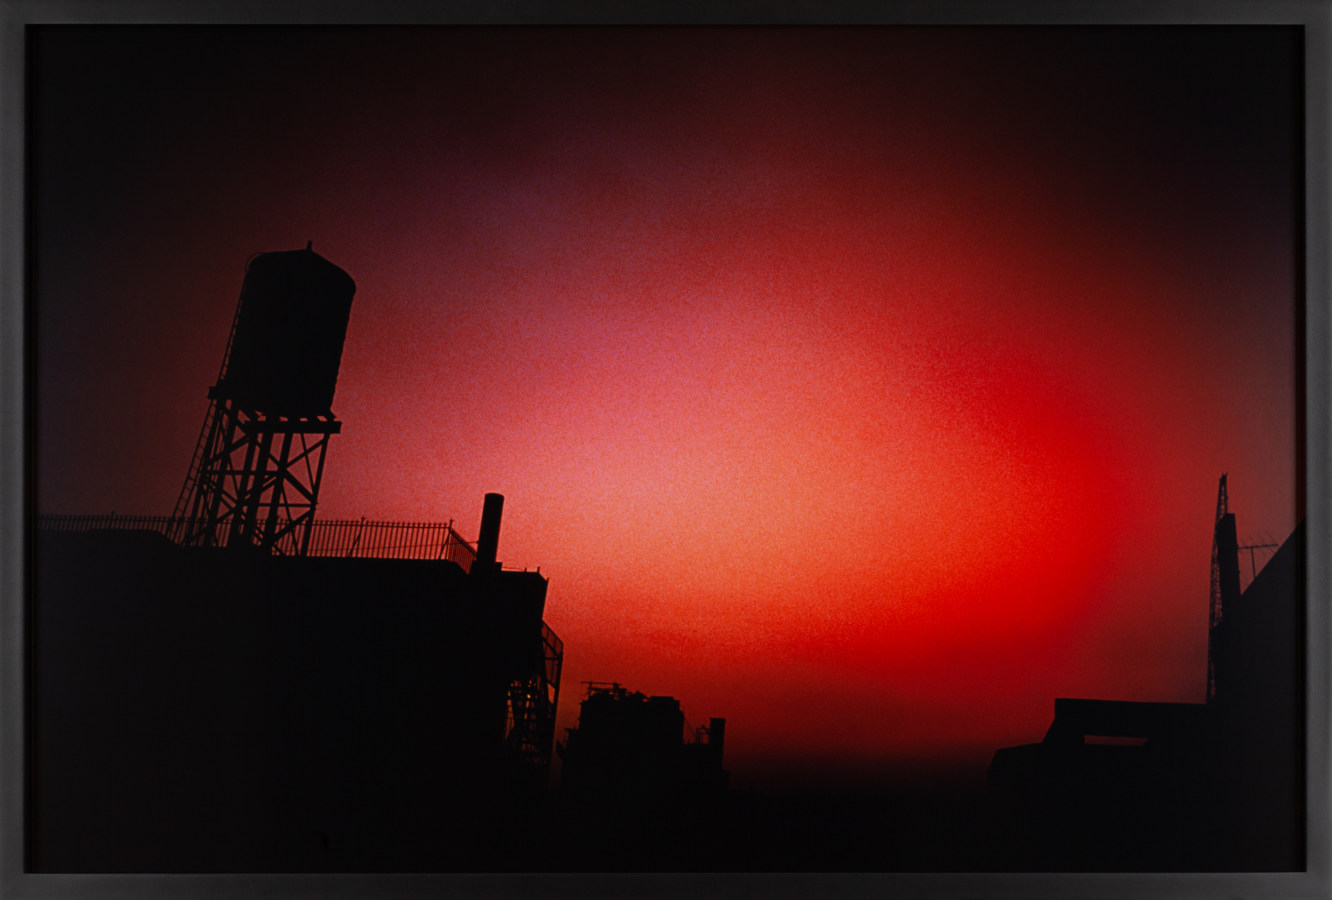 Color photograph of an overcast night sky with a red glow above city buildings and a rooftop watertower